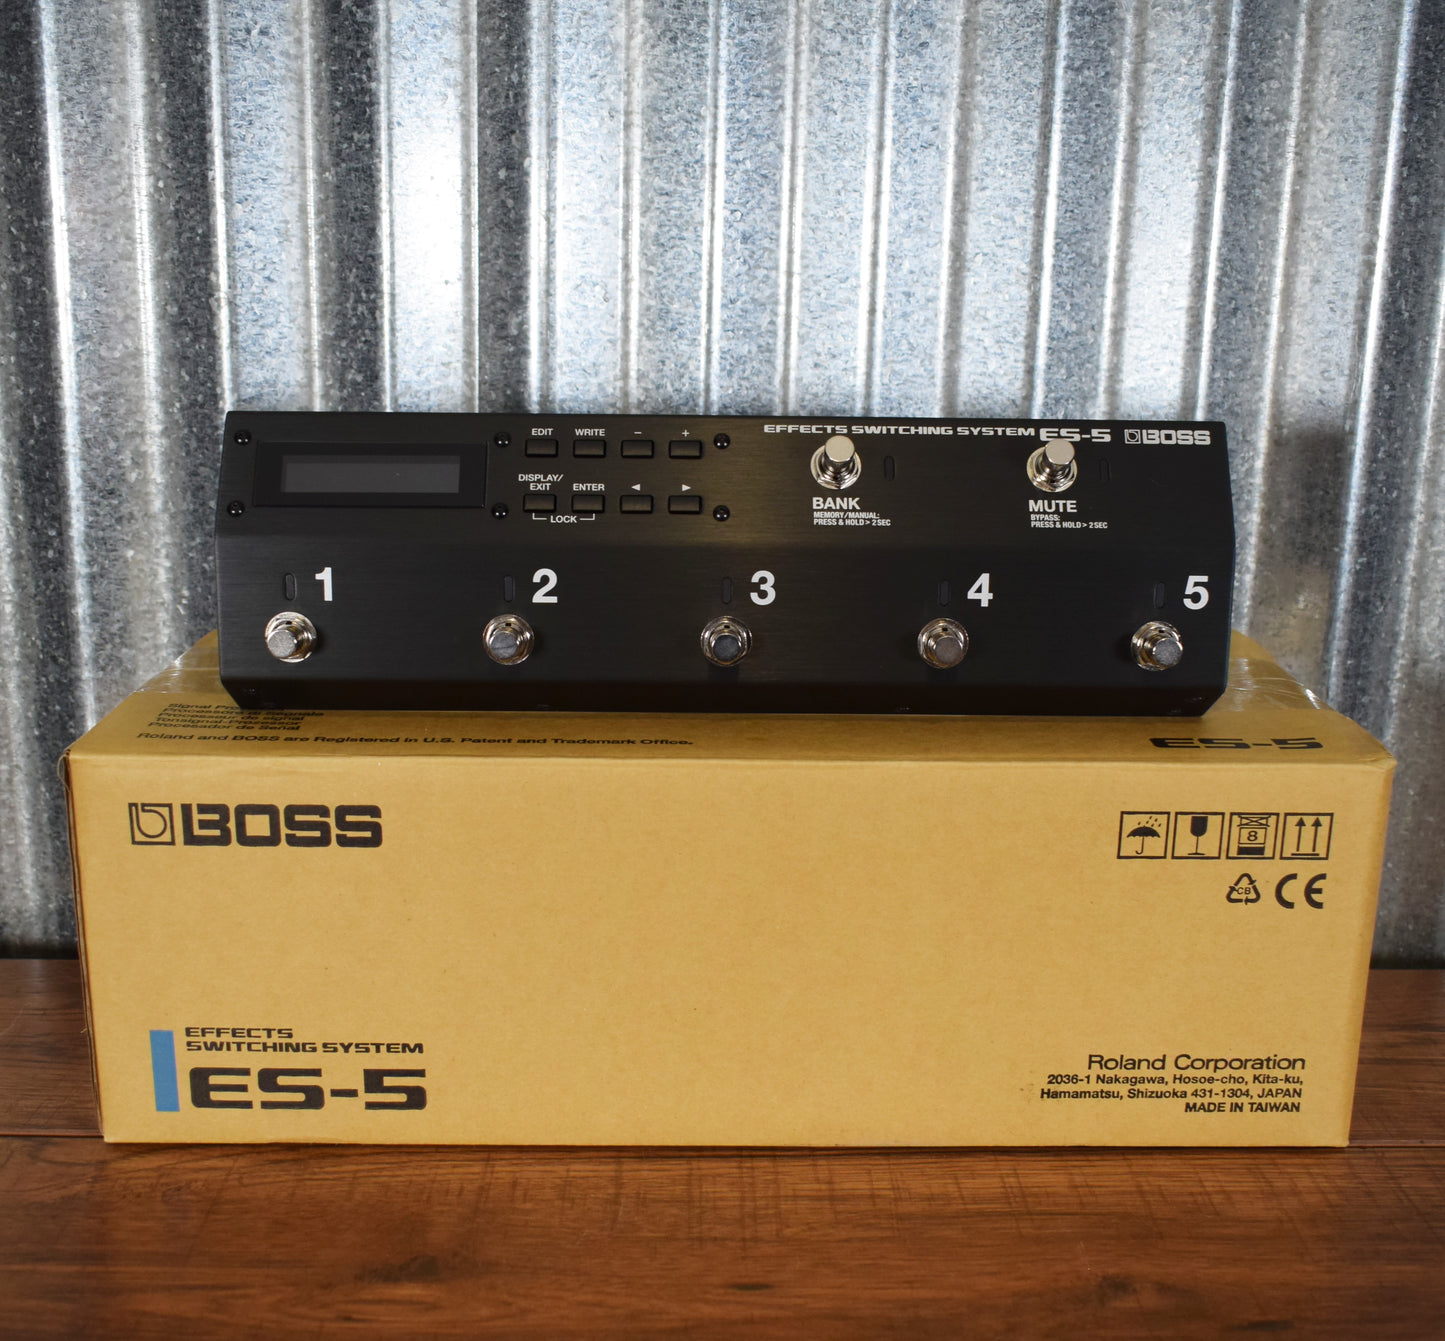 Boss ES-5 Guitar Effect Pedal Switching Selector System